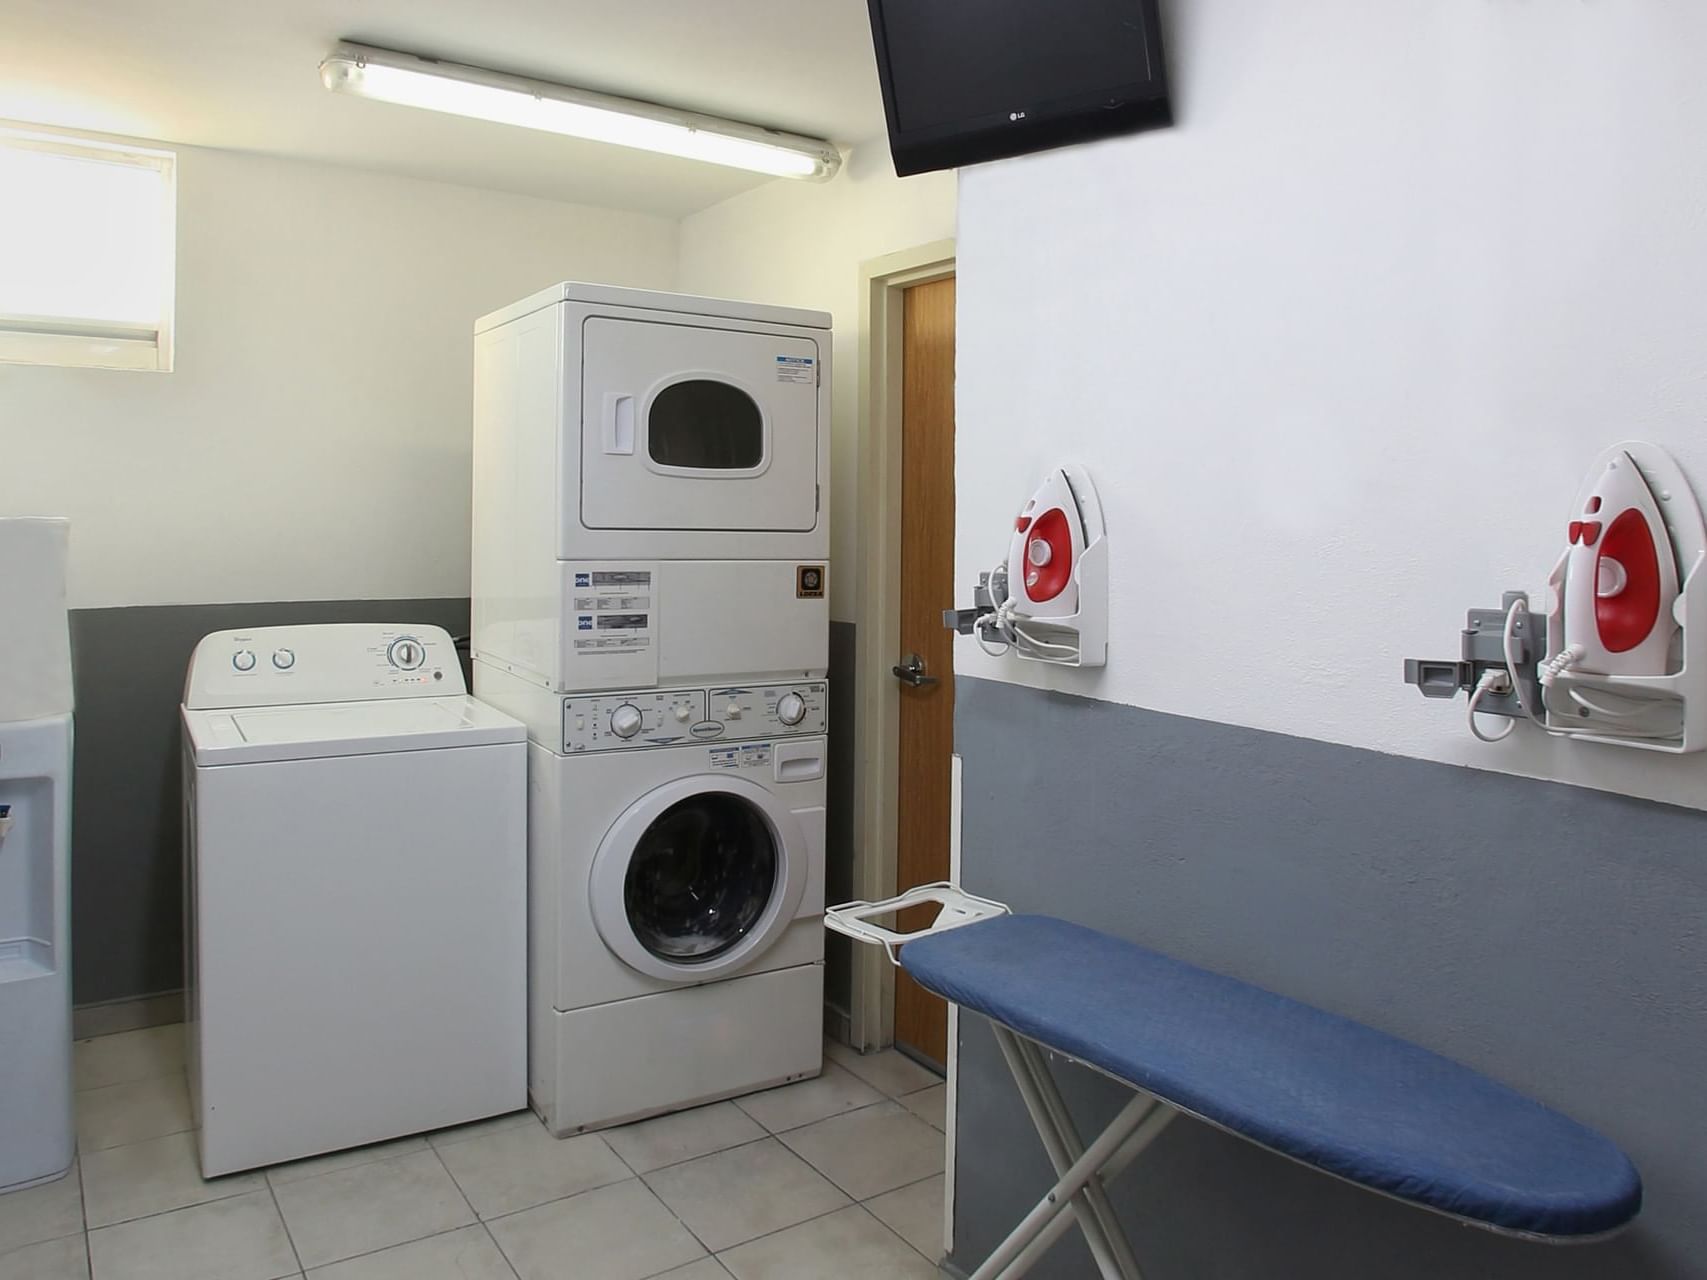 Washing machine, dryer & irons in Laundry Room at One Hotels